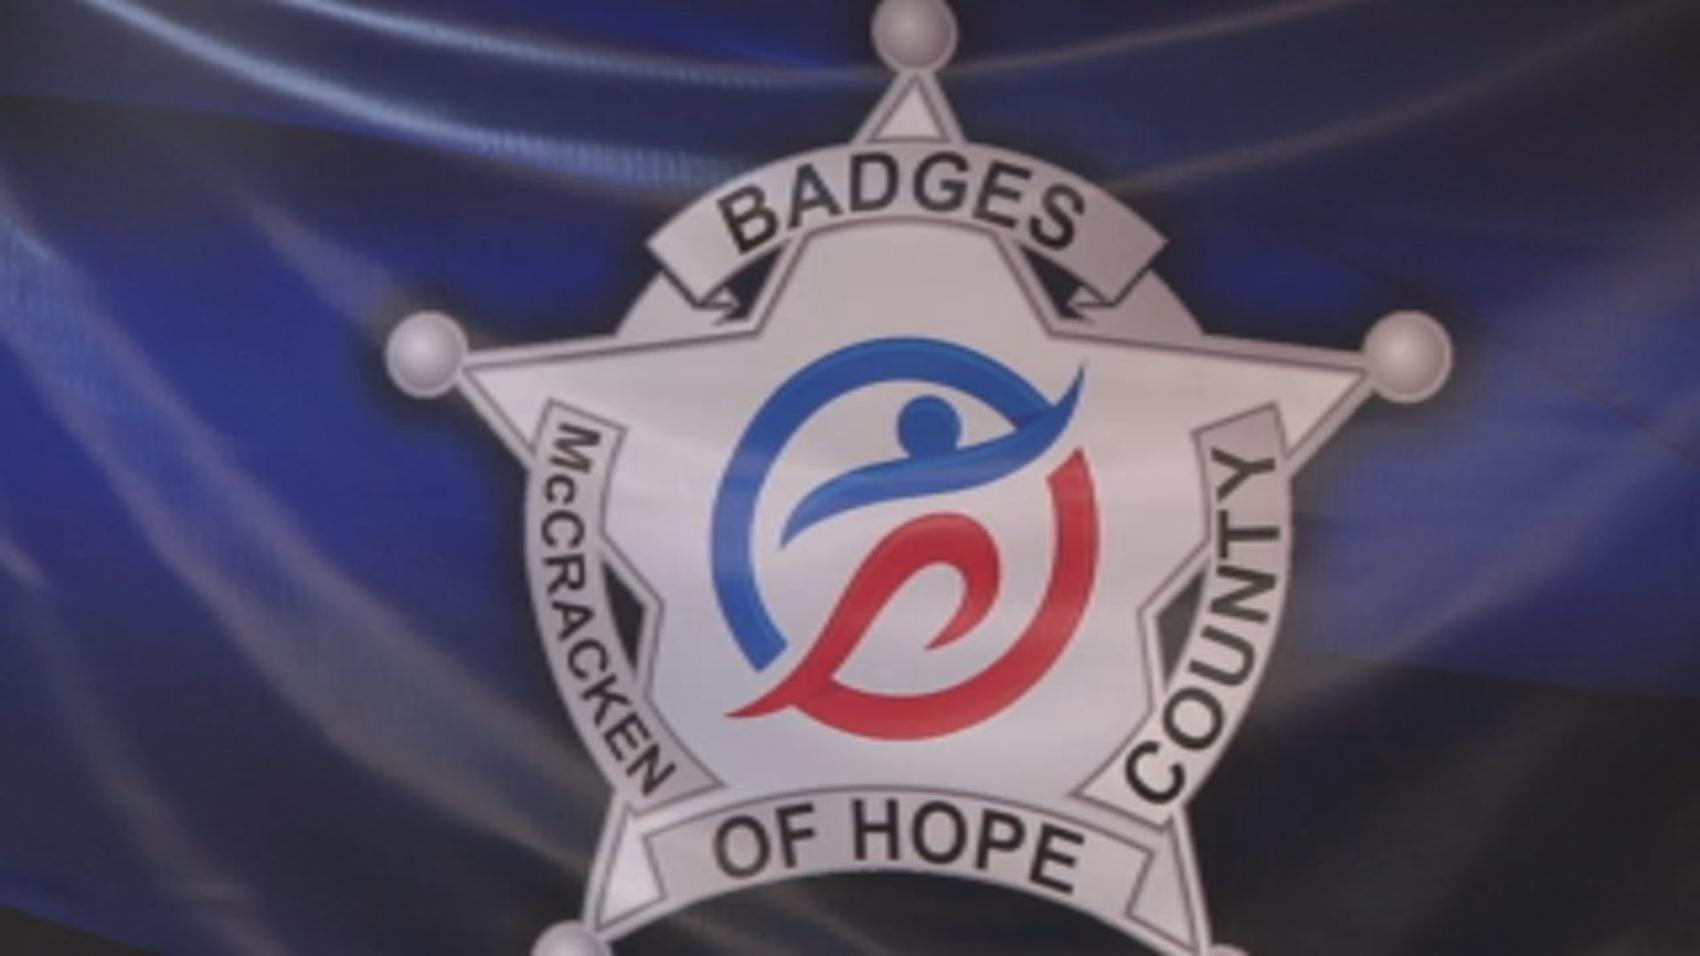 Badges of Hope aims to tackle drug epidemic in our community